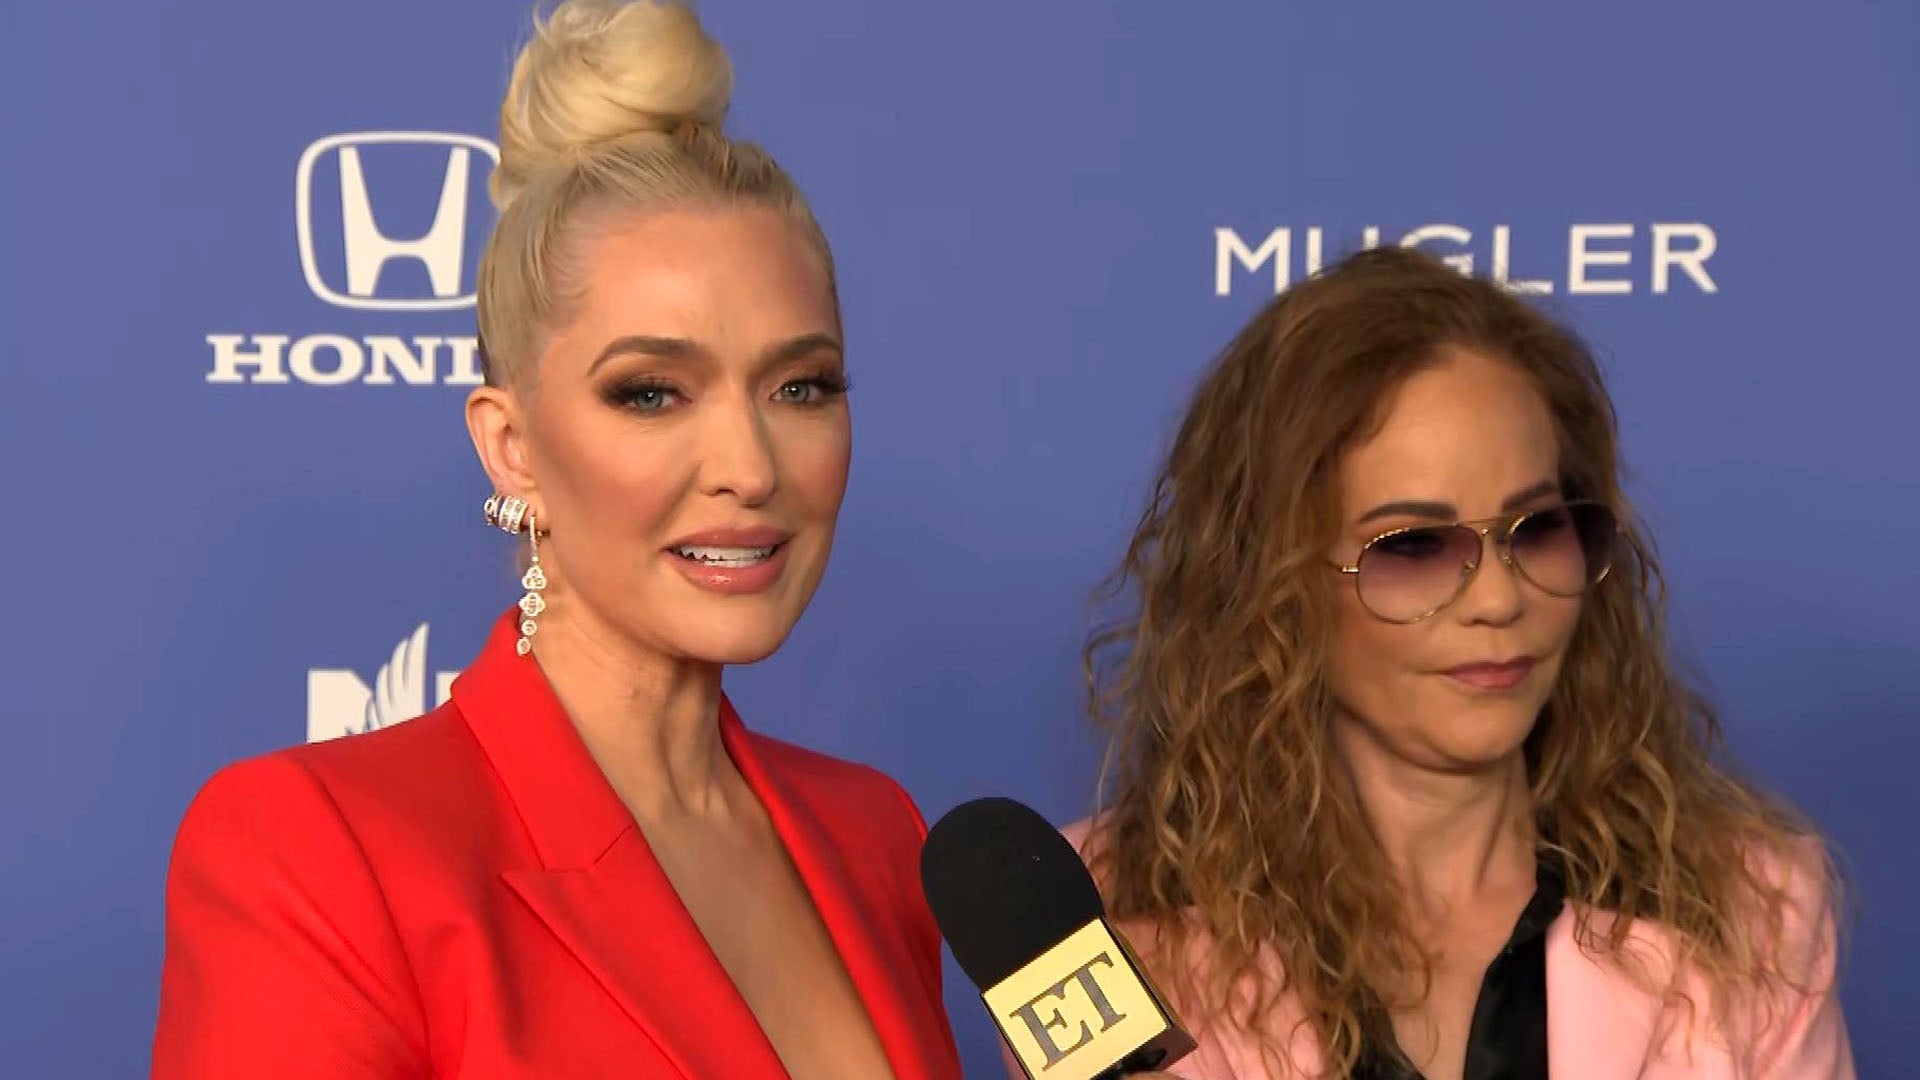 Erika Jayne on Finding ‘Peace’ After Legal Troubles and ‘RHOBH’ Without Lisa Rinna (Exclusive)